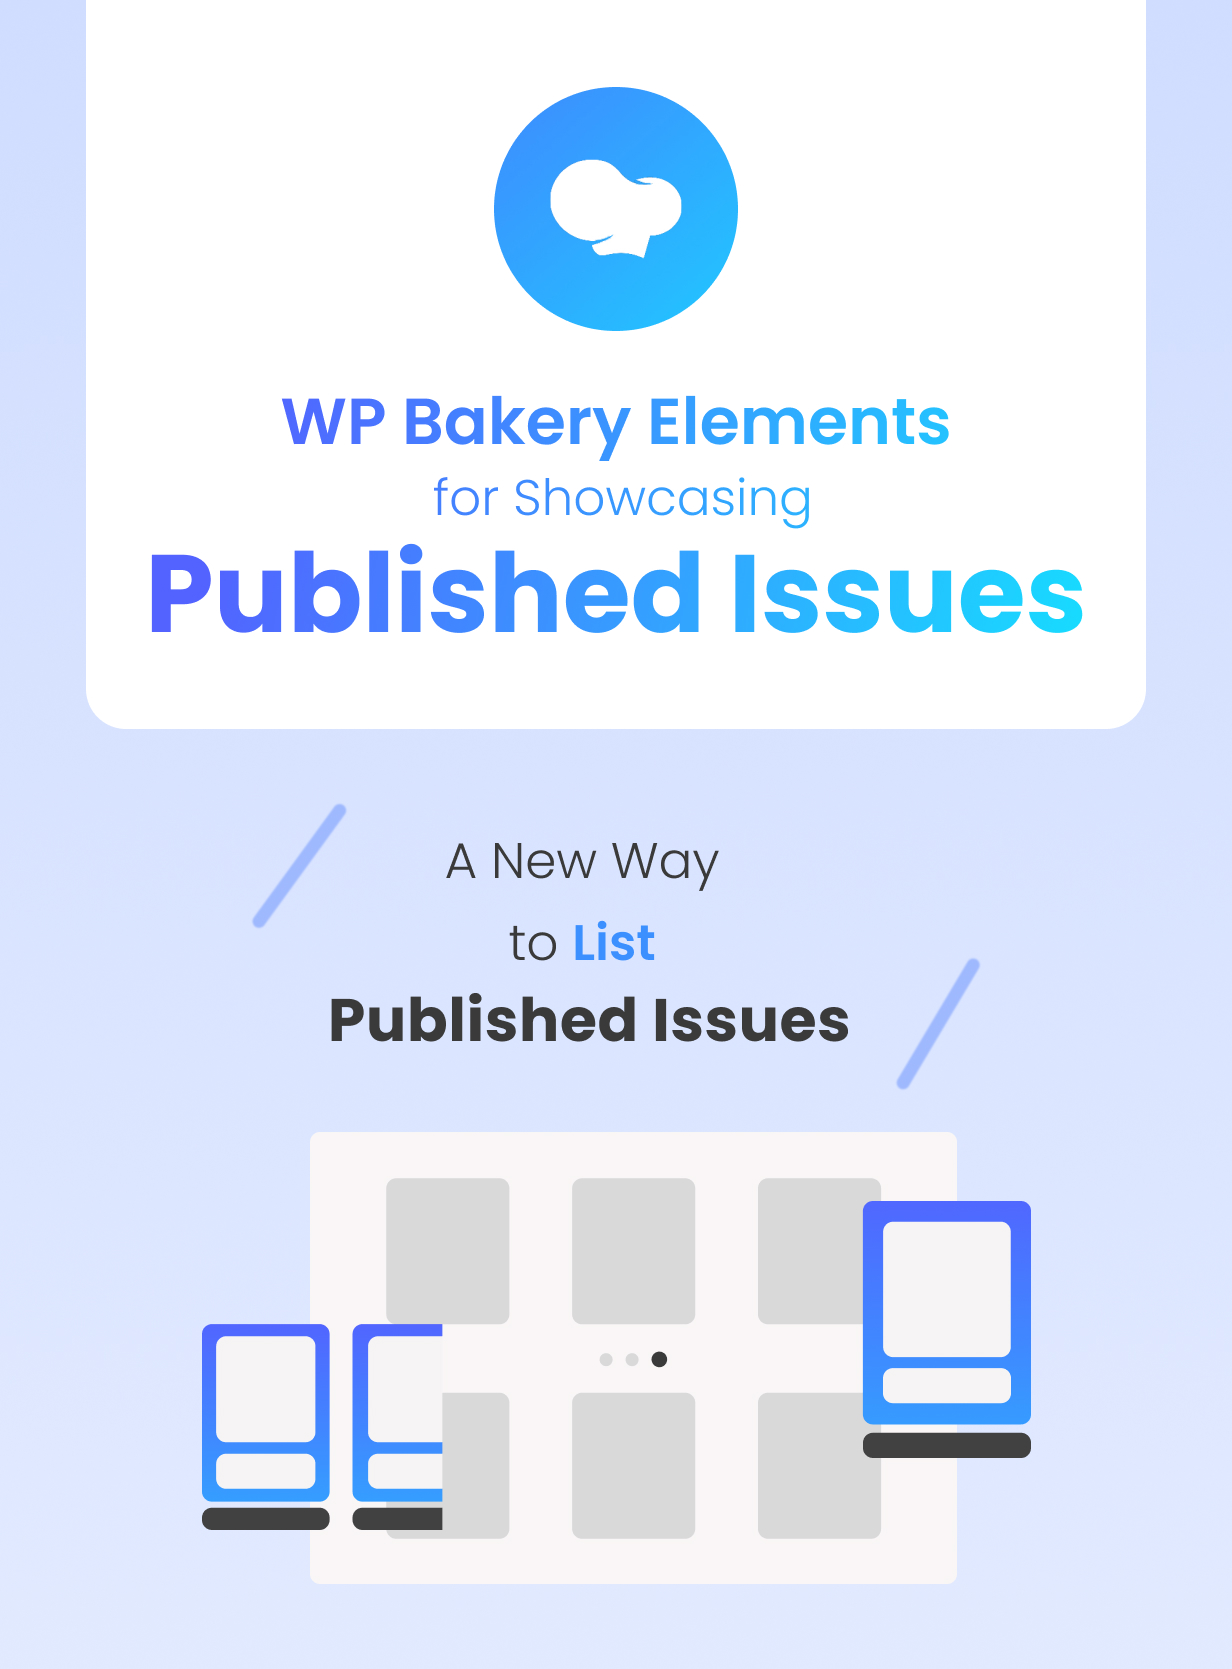 About WP Bakery and Designed Elements of Journal Research Publication Plugin